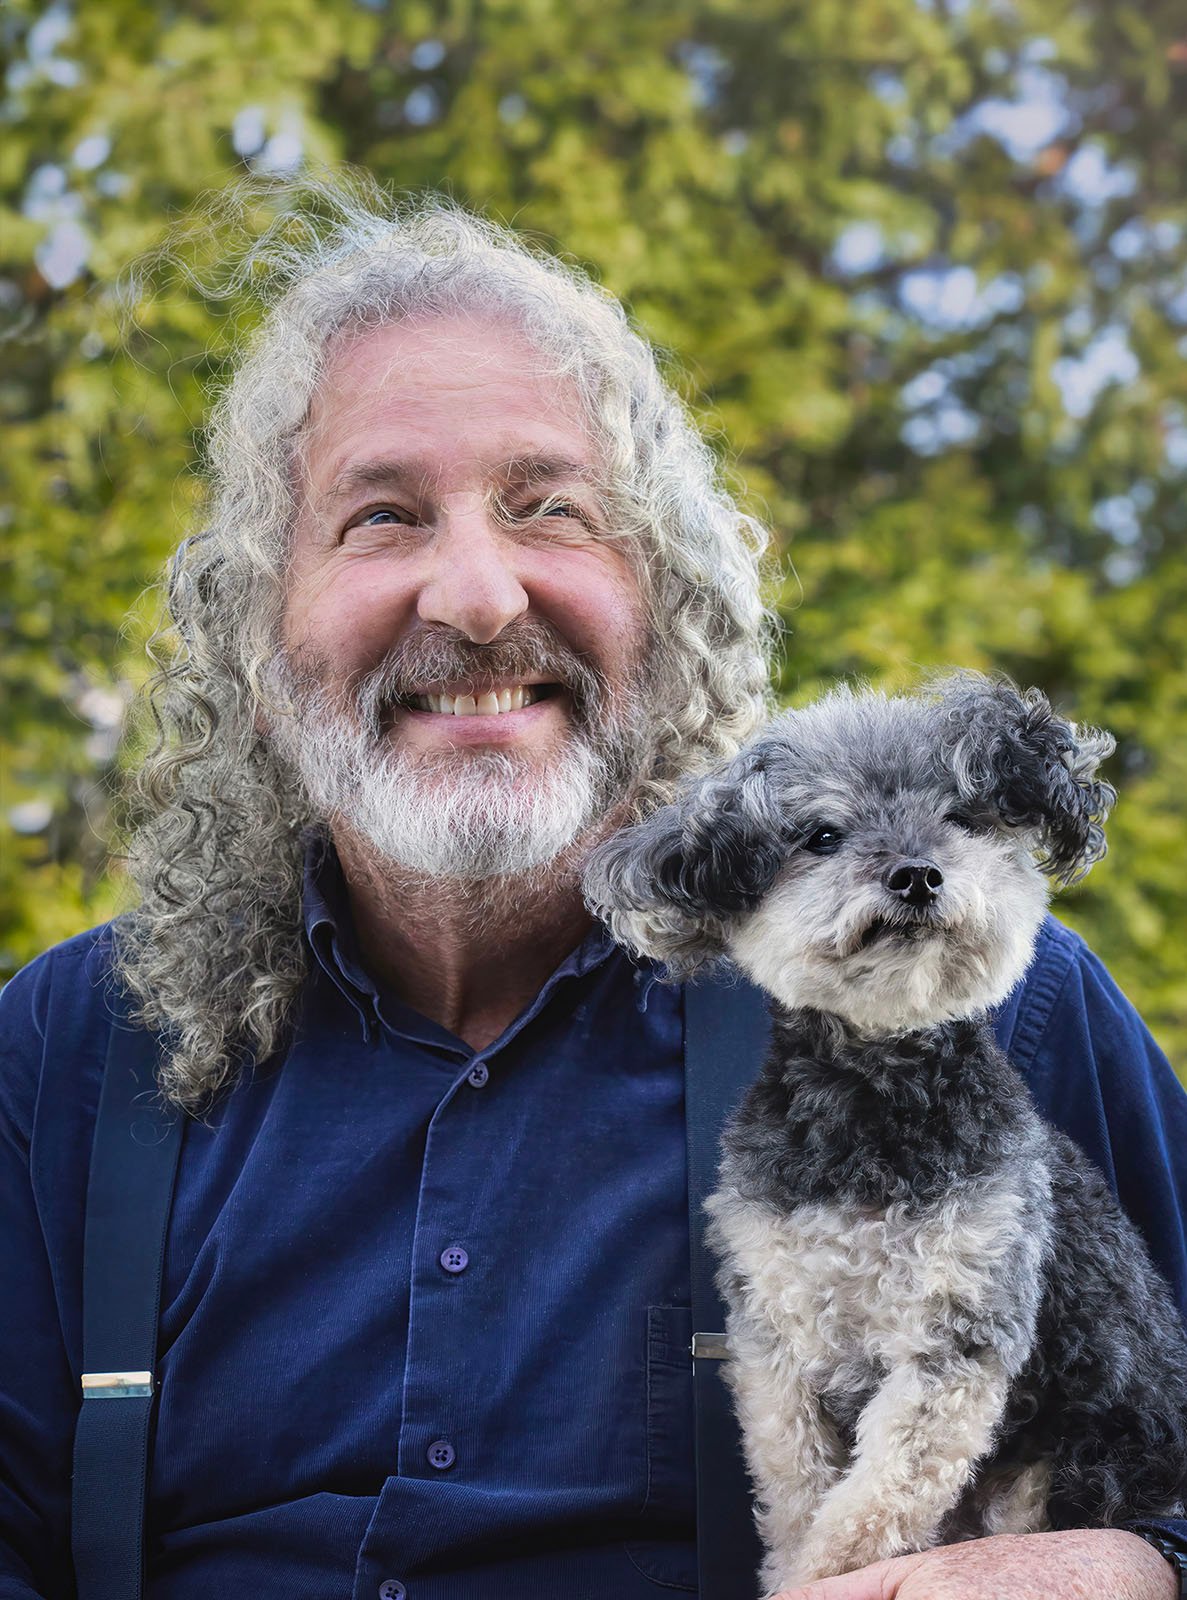 A smiling man with long curly gray hair and a beard, wearing a dark blue shirt with suspenders, is holding a small black and white fluffy dog. They are outdoors in front of a blurred green background.